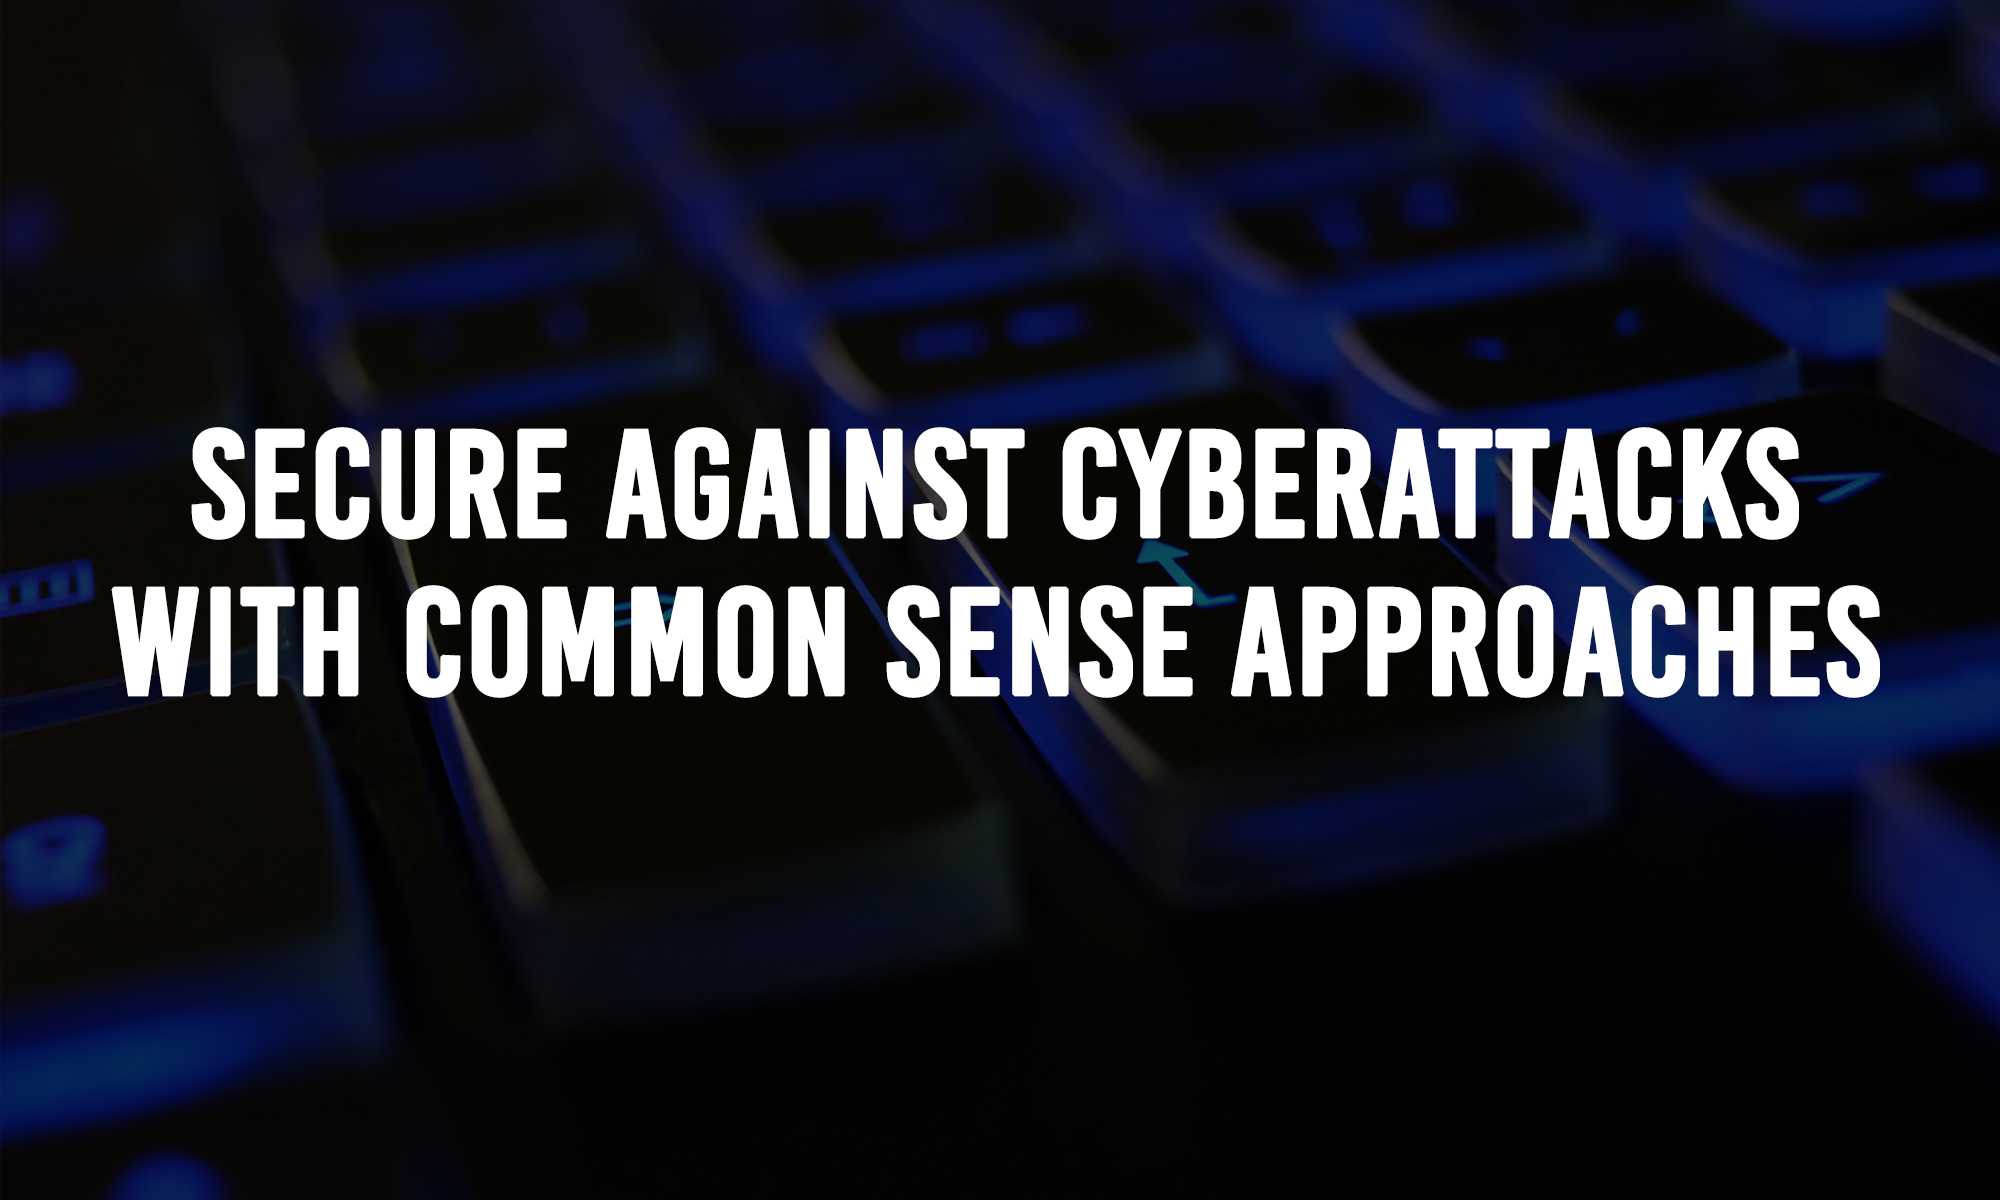 Secure Against Cyberattacks with Common Sense Approaches